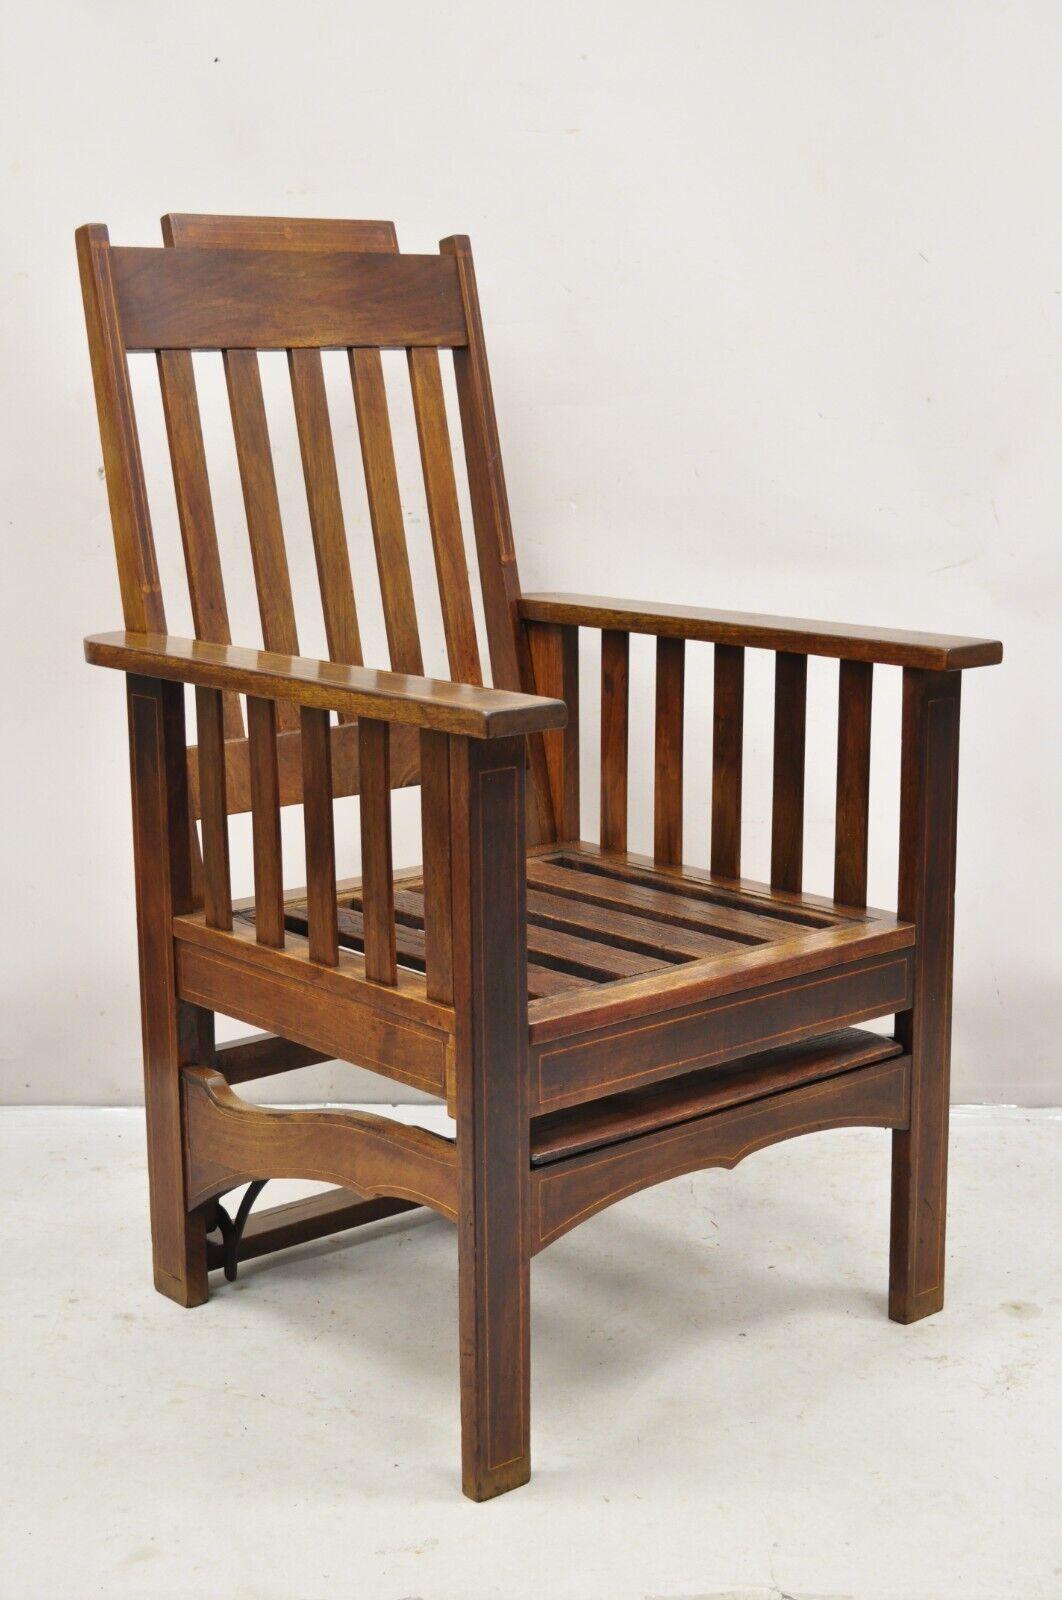 Antique Mahogany Edwardian Mechanical Reclining Morris Chair with Pencil Inlay. Circa 1900. 45.5